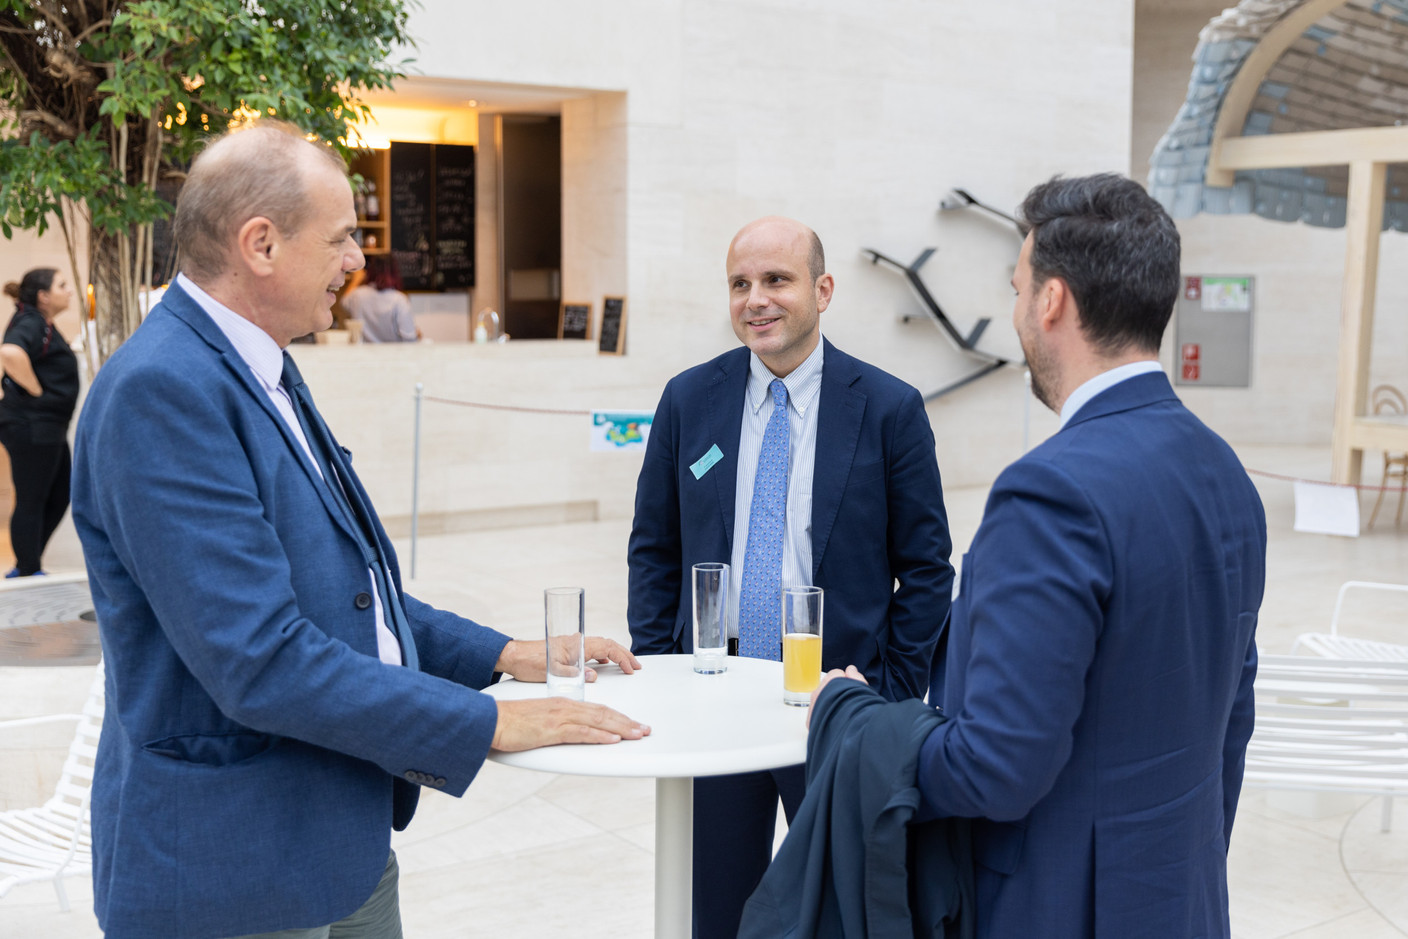 Francesco Pirovano of Intesa Sanpaolo (centre) is seen during Luxflag Sustainable Investment Week 2022, 17 October 2022. Photo: Romain Gamba/Maison Moderne